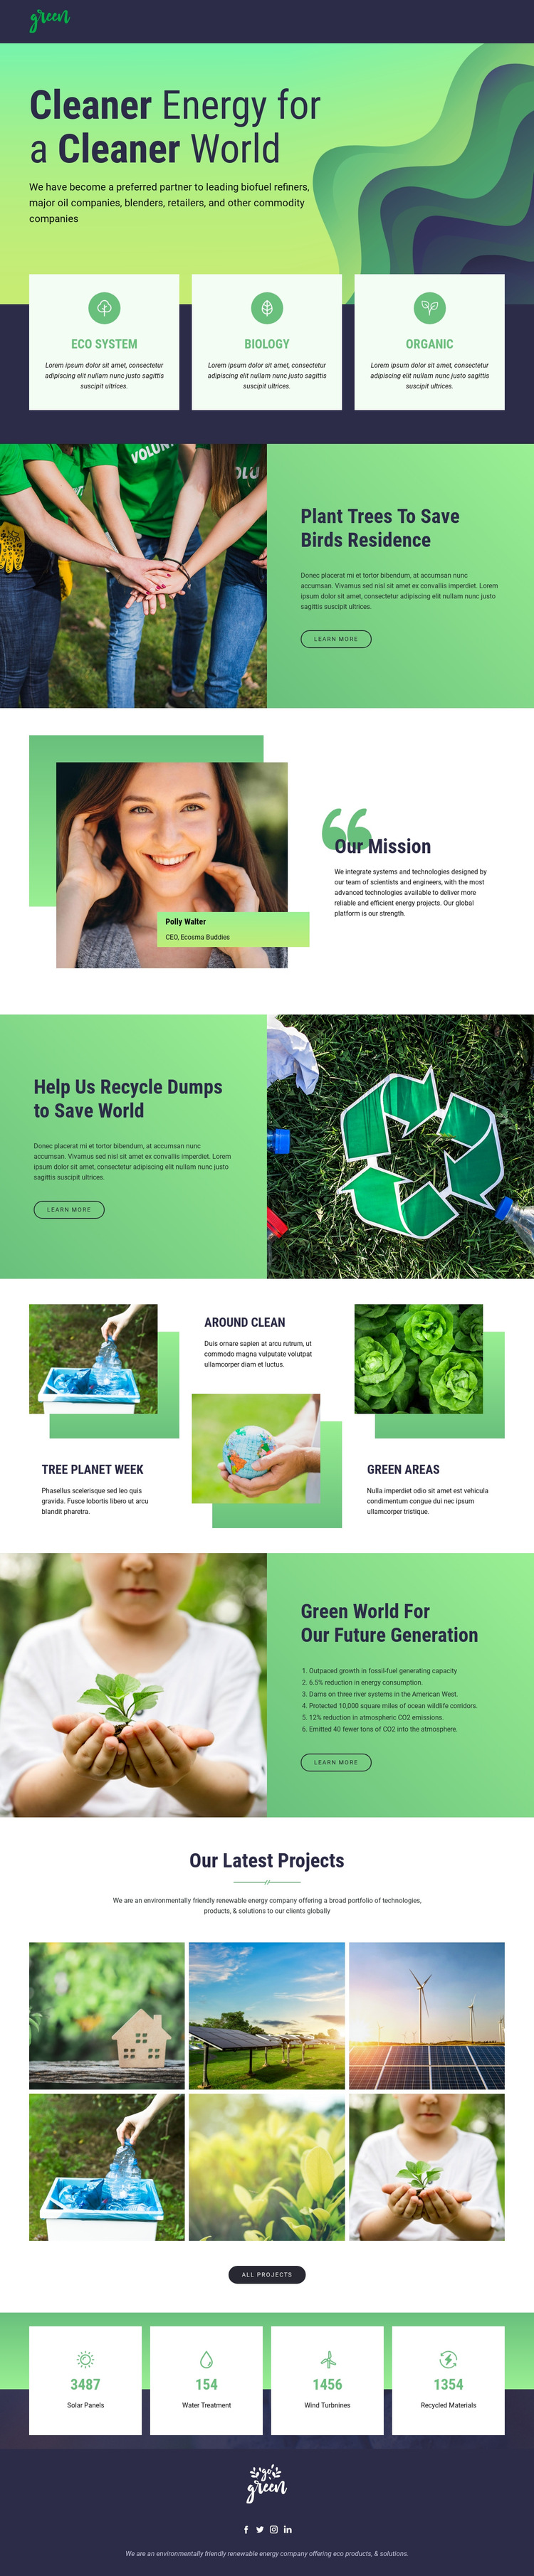 Clean energy to save nature HTML5 Template